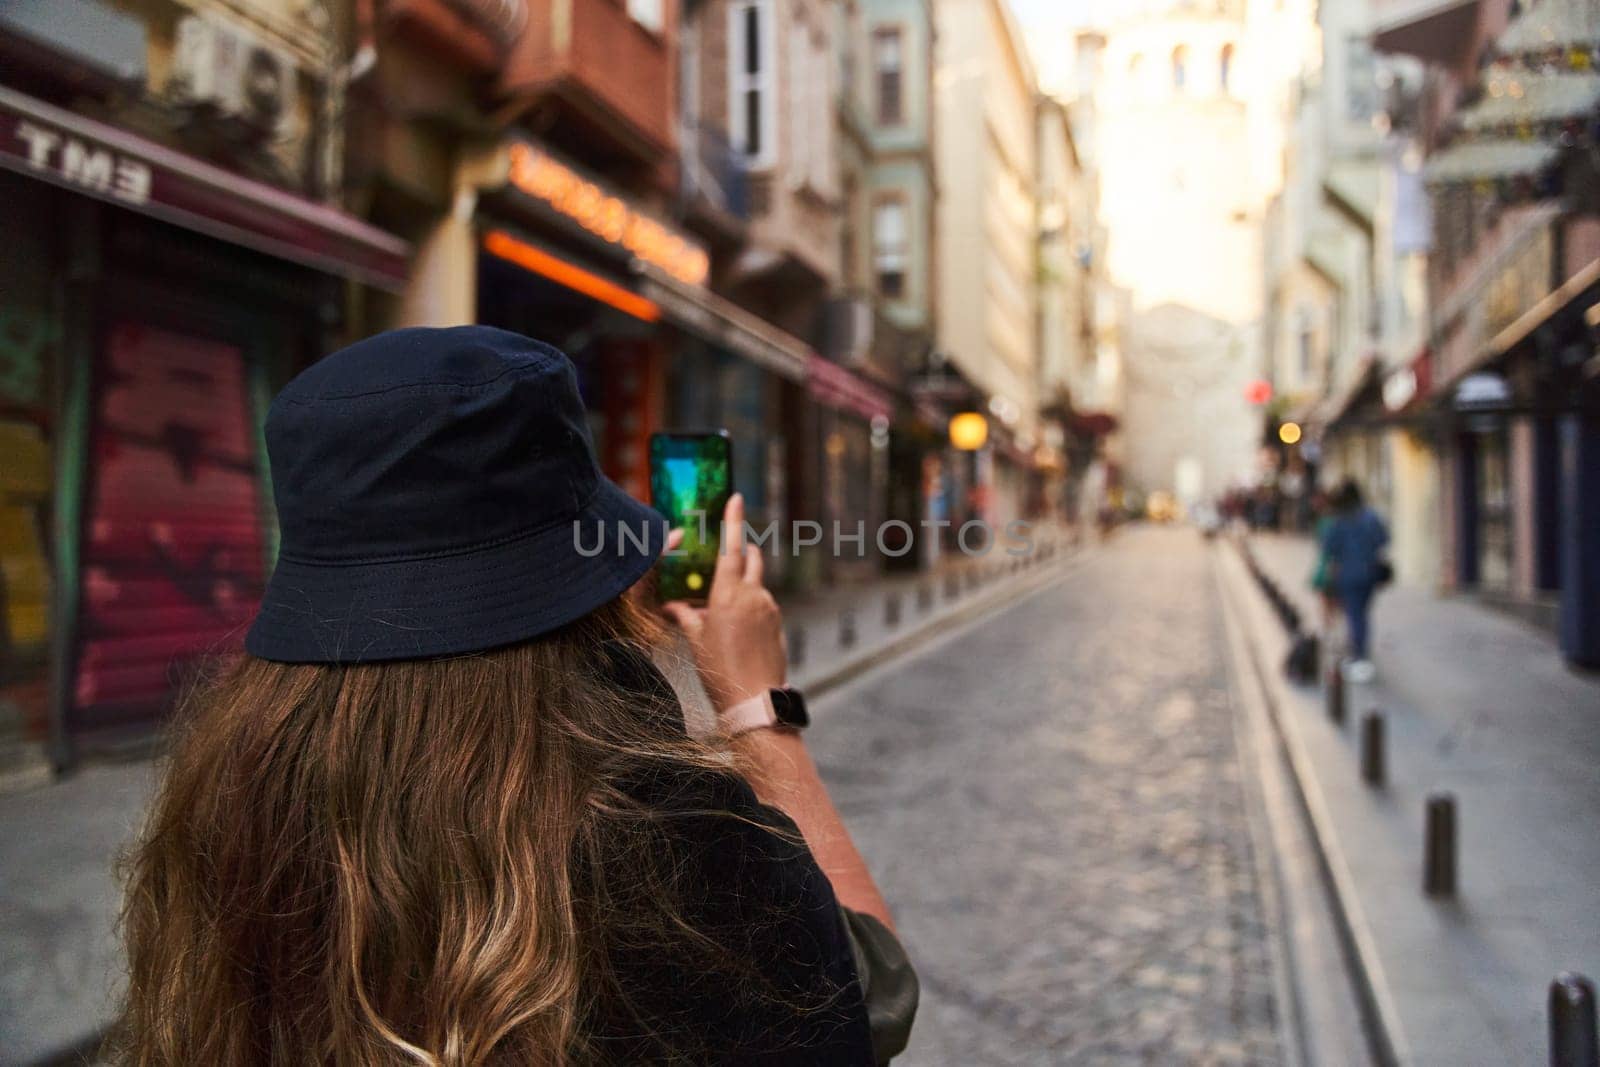 ISTANBUL, TURKEY - 08.05.2021: Young woman photographs the sights of Istanbul on her phone by driver-s